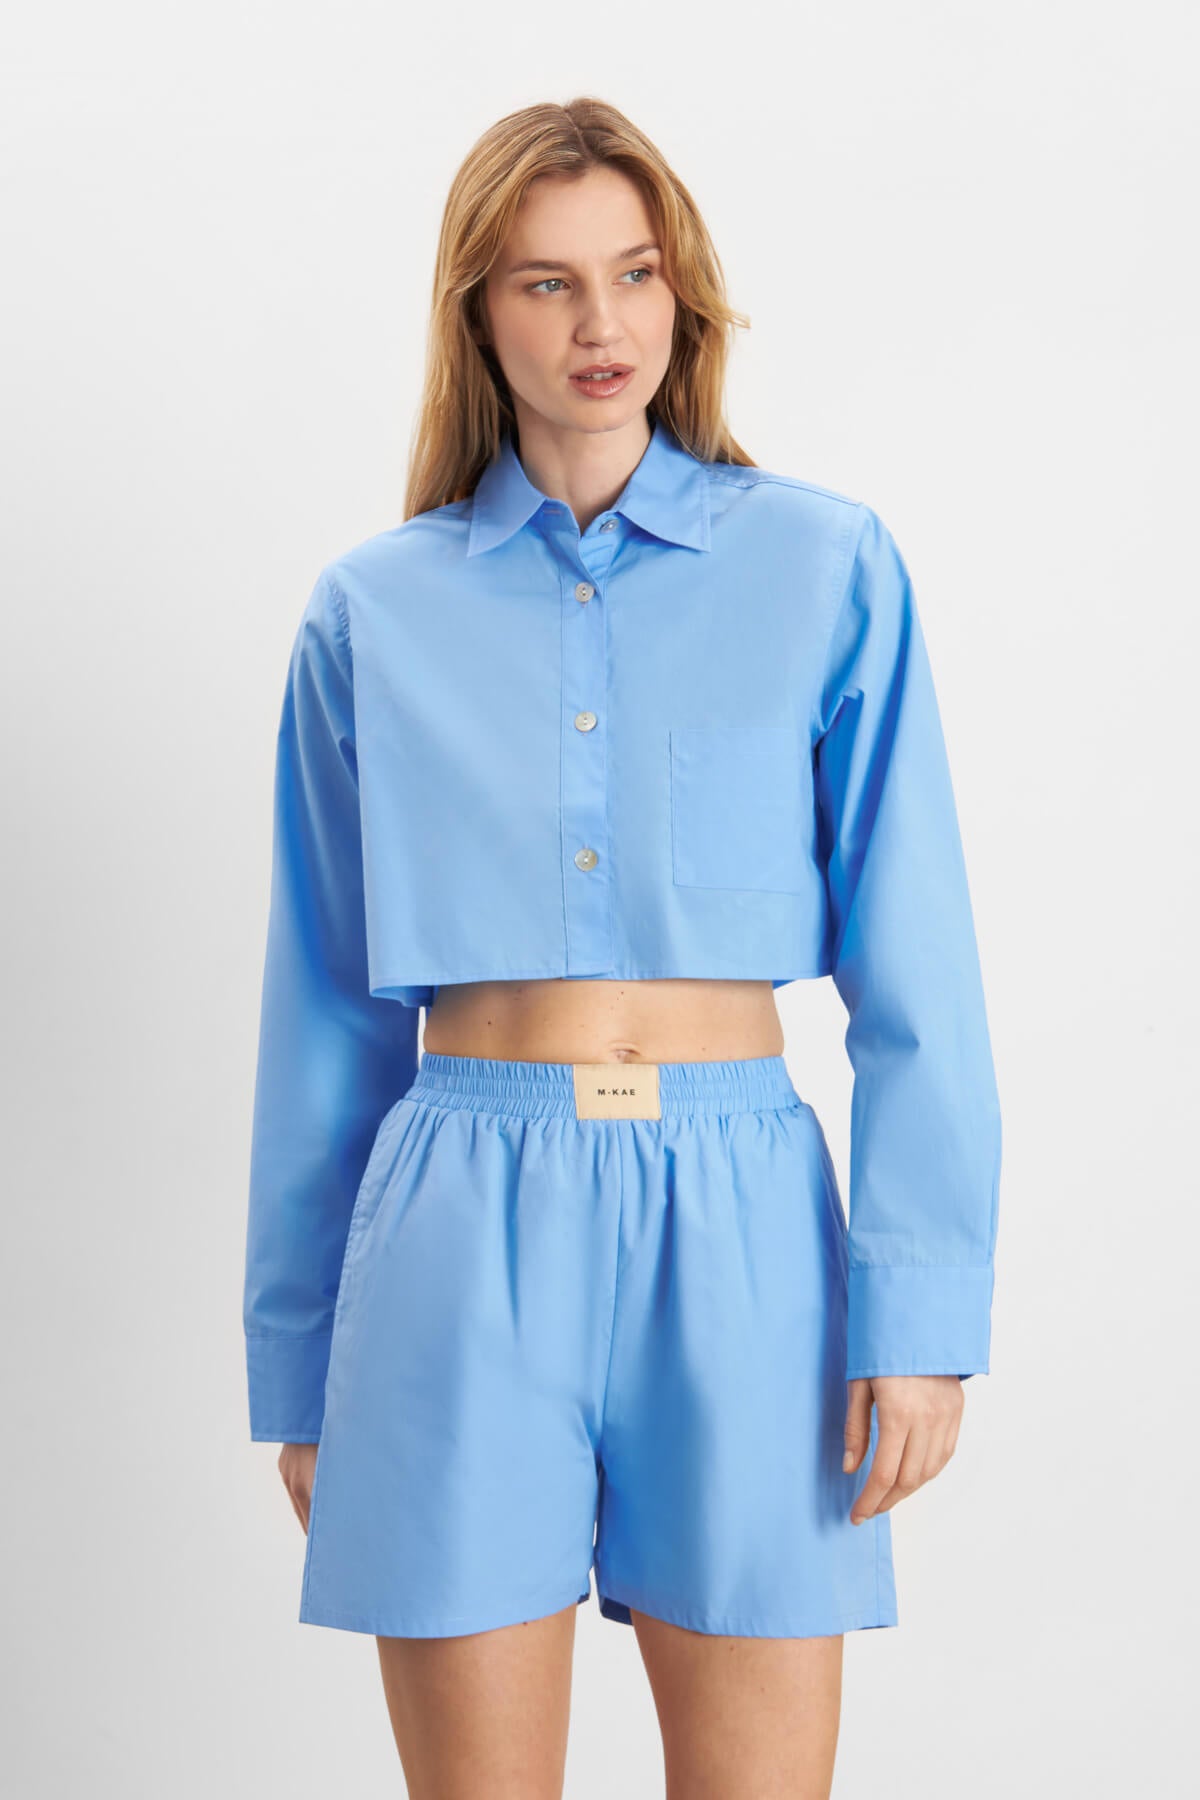 Hurley Cropped Shirt - Blue